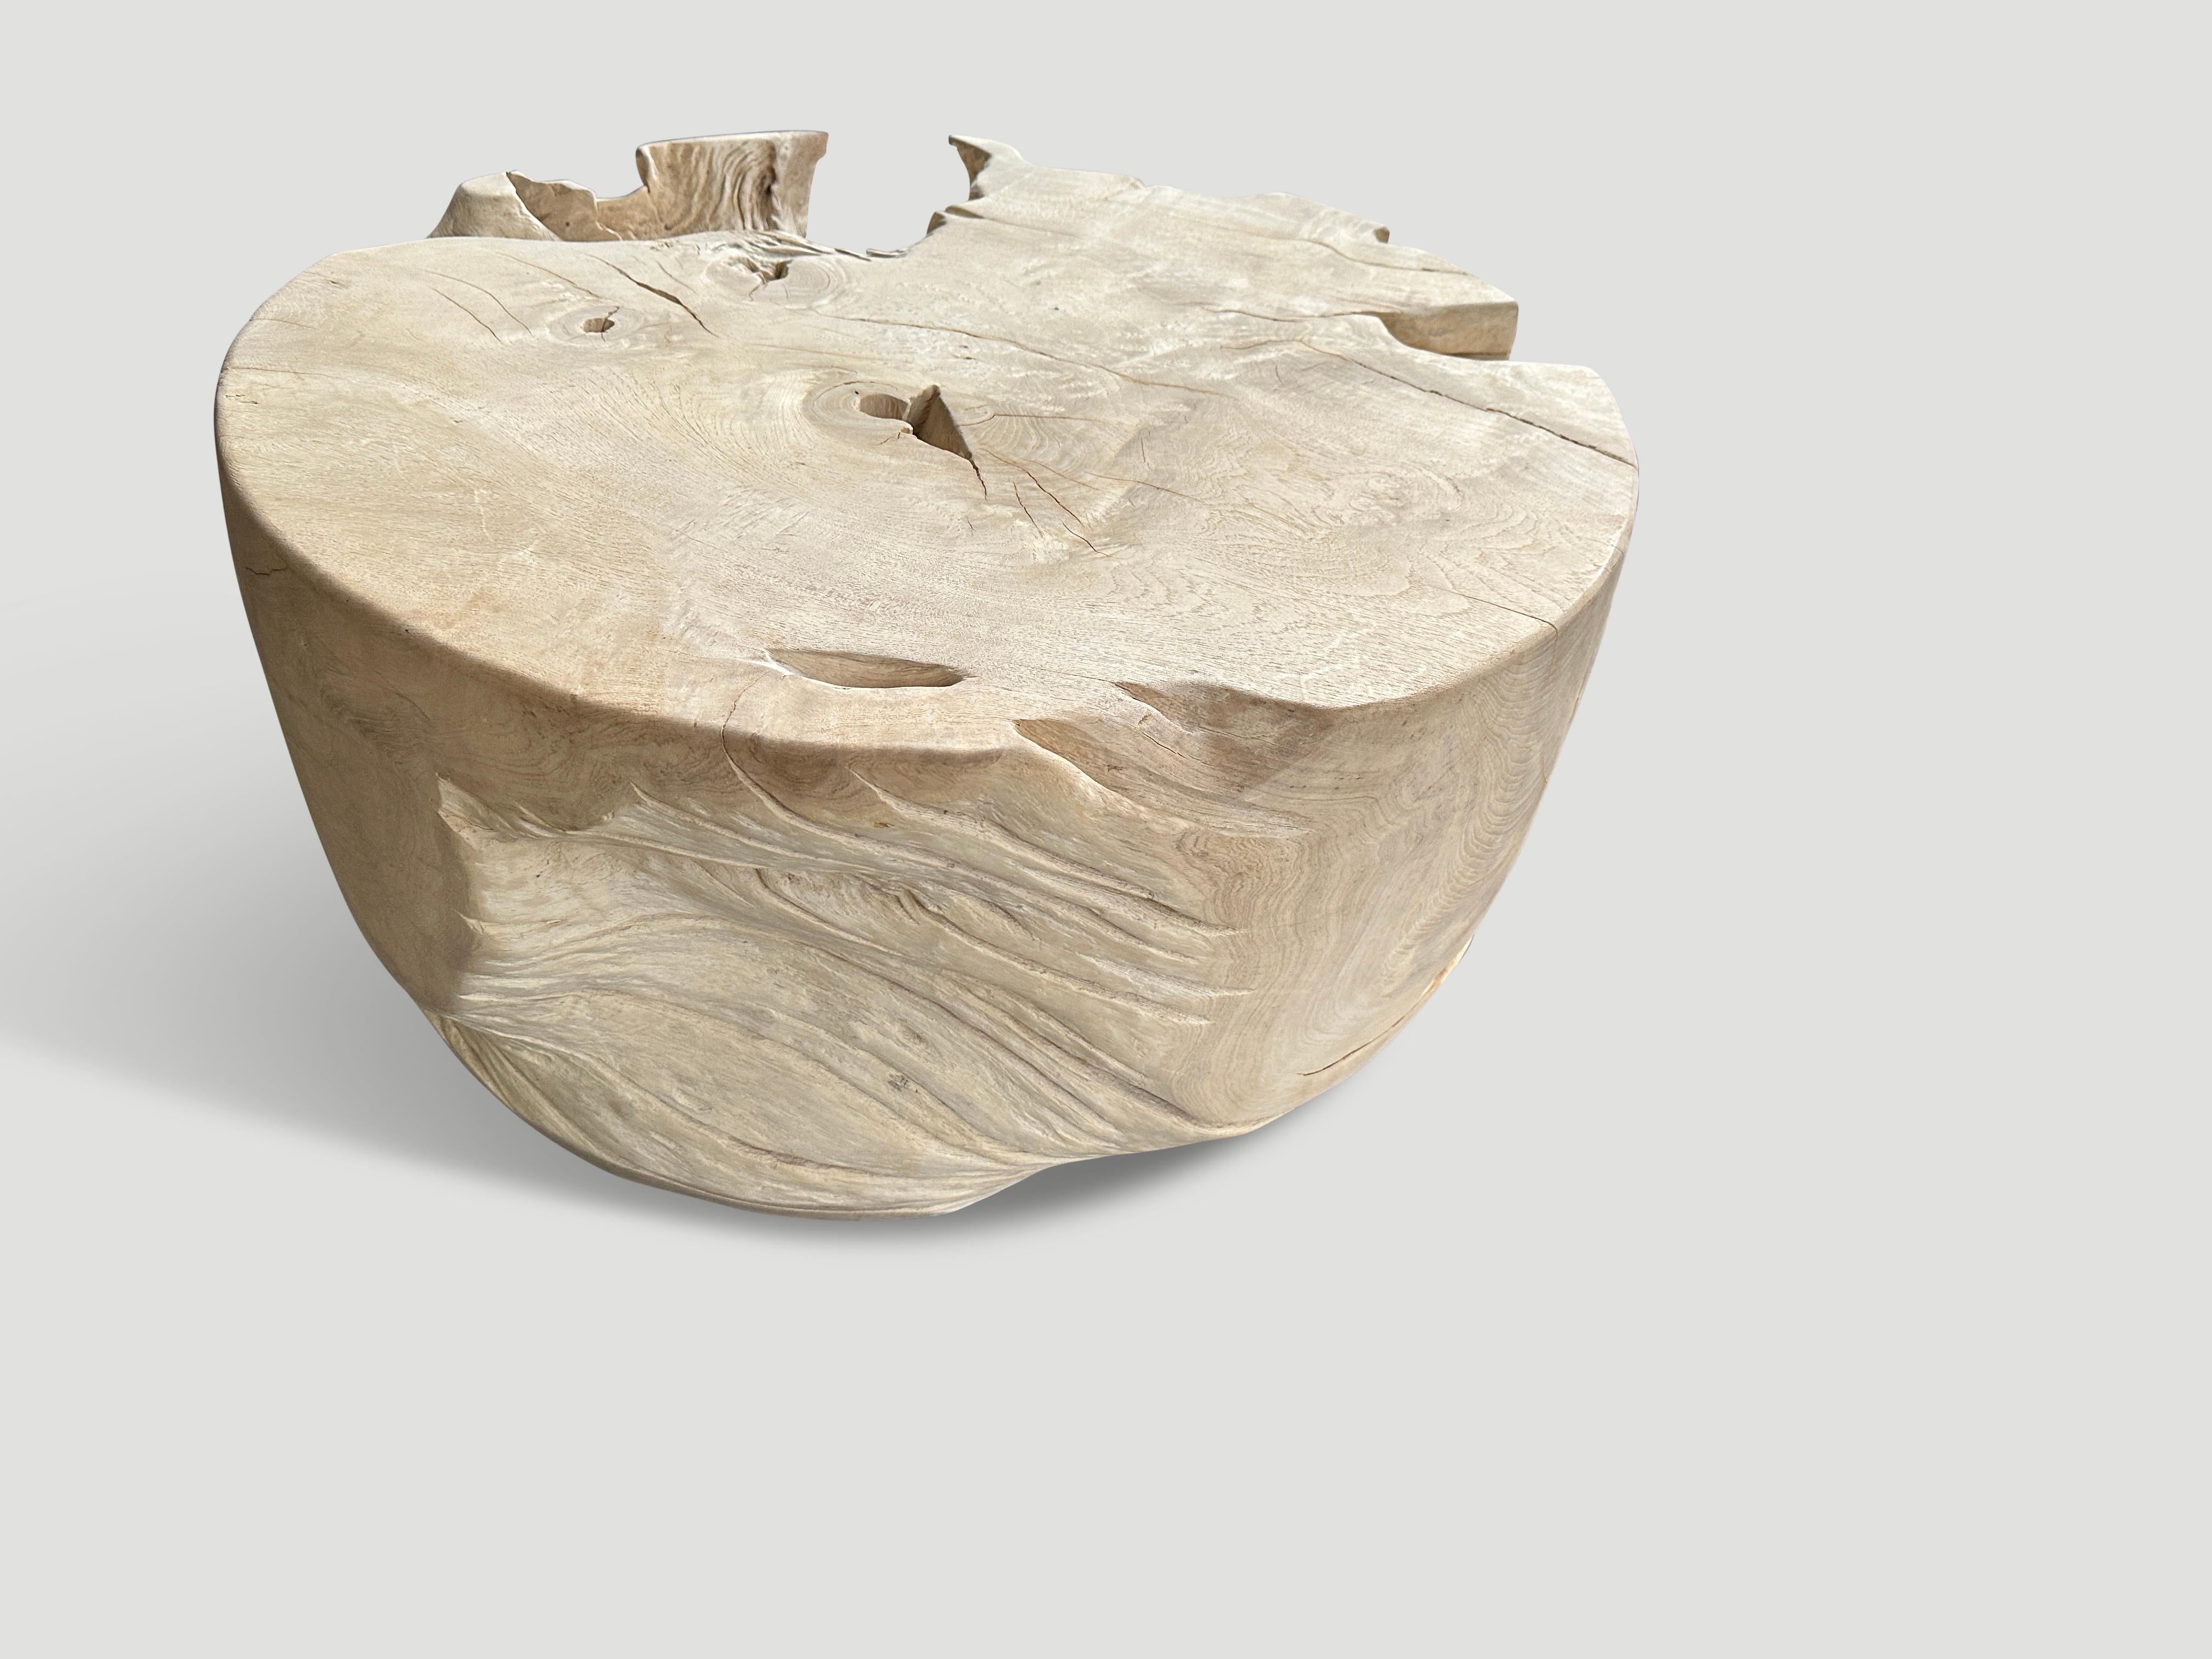 Reclaimed teak root coffee table hand carved into a drum shape whilst respecting the natural organic wood. We added a light white wash finish revealing the beautiful wood grain.

The St. Barts Collection features an exciting line of organic white